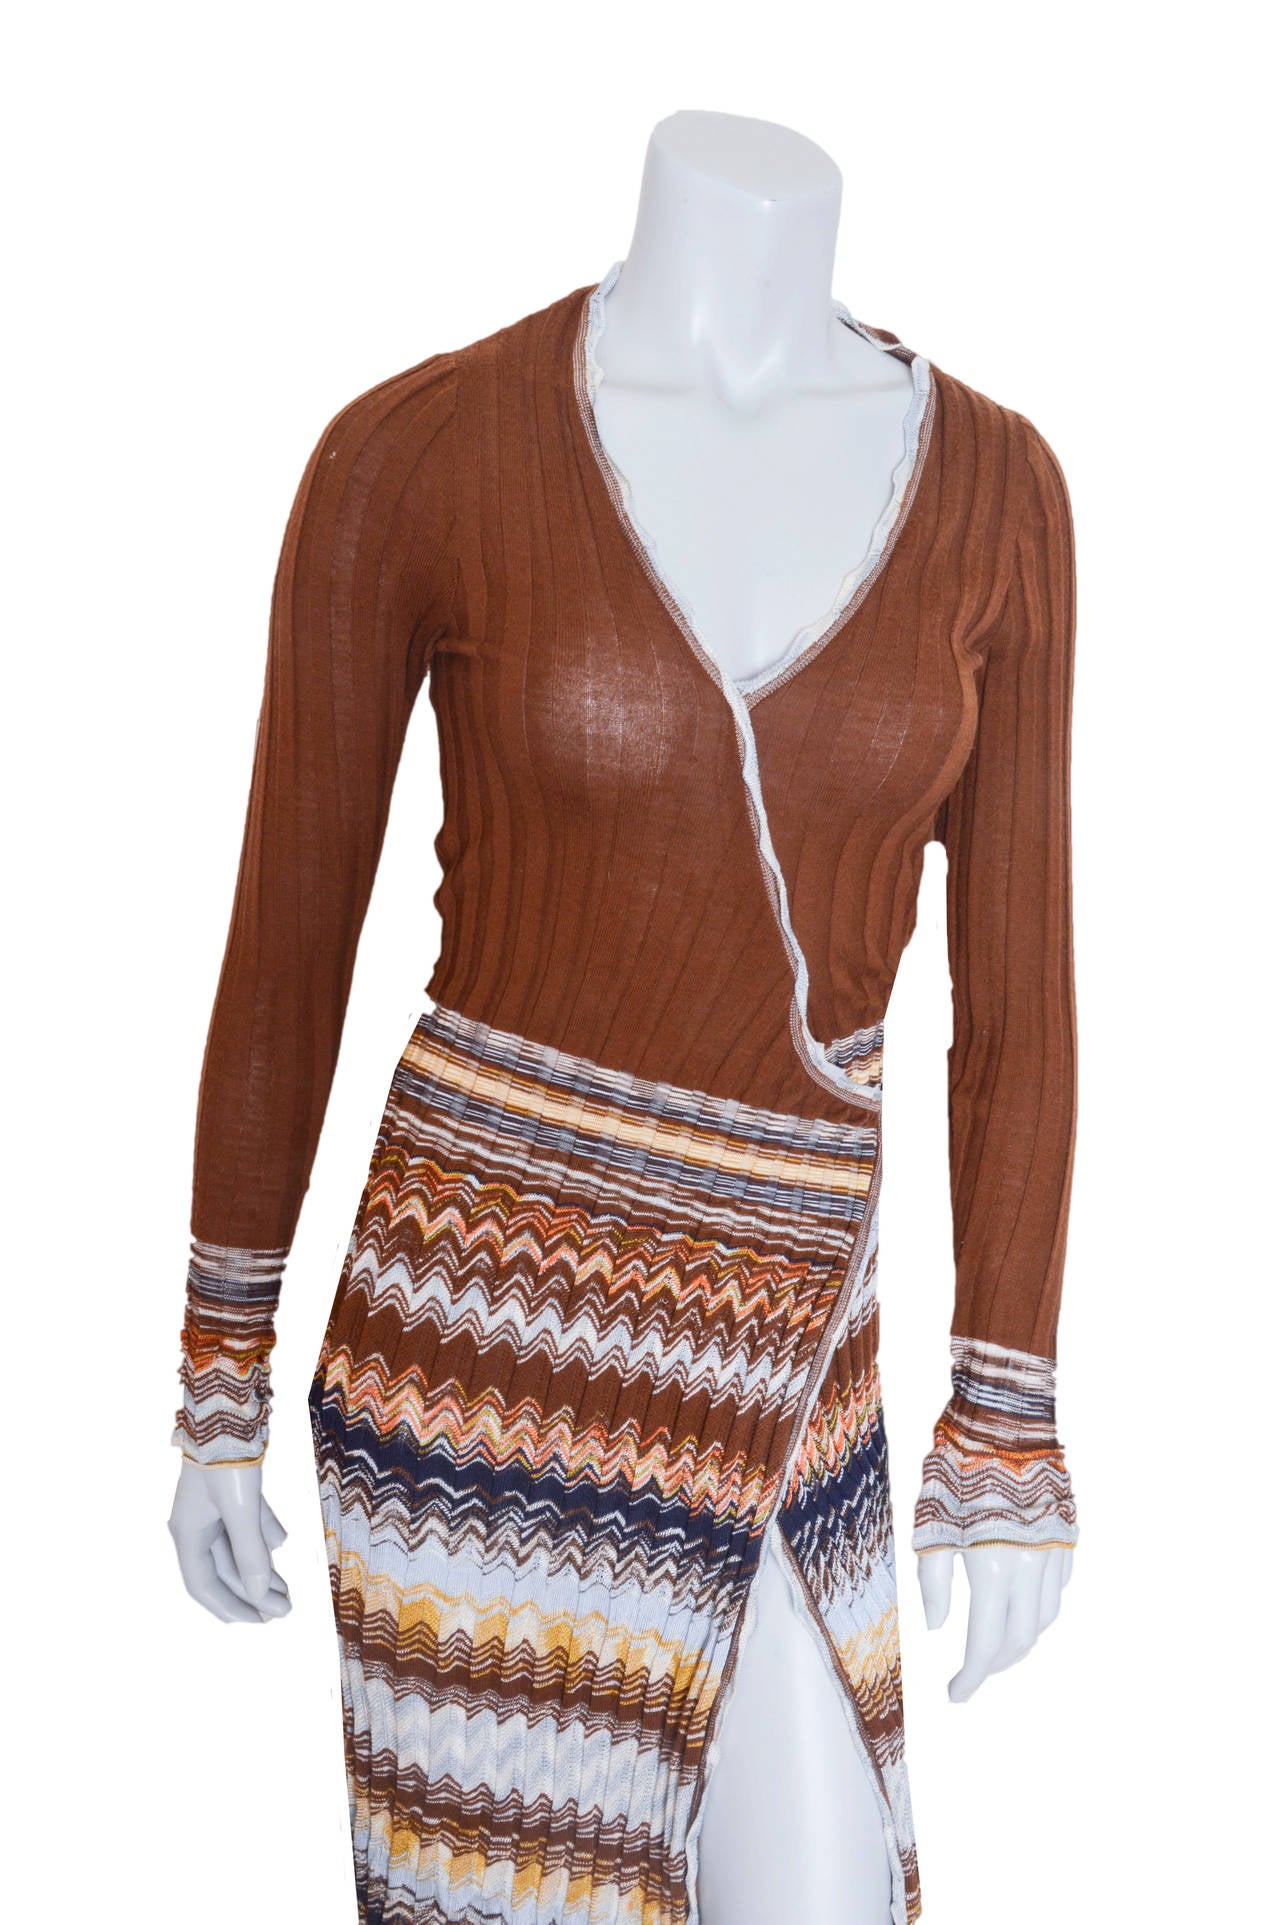 Body clinging faux wrap dress by M Missoni.
Ribbed knit wrap bodice is stitched down.
Skirt features actual wrap skirt with tie that secures in back.
Signature zig zag design on skirt and cuffs.
Very stretchy and body conscious.
Tagged a US 4.